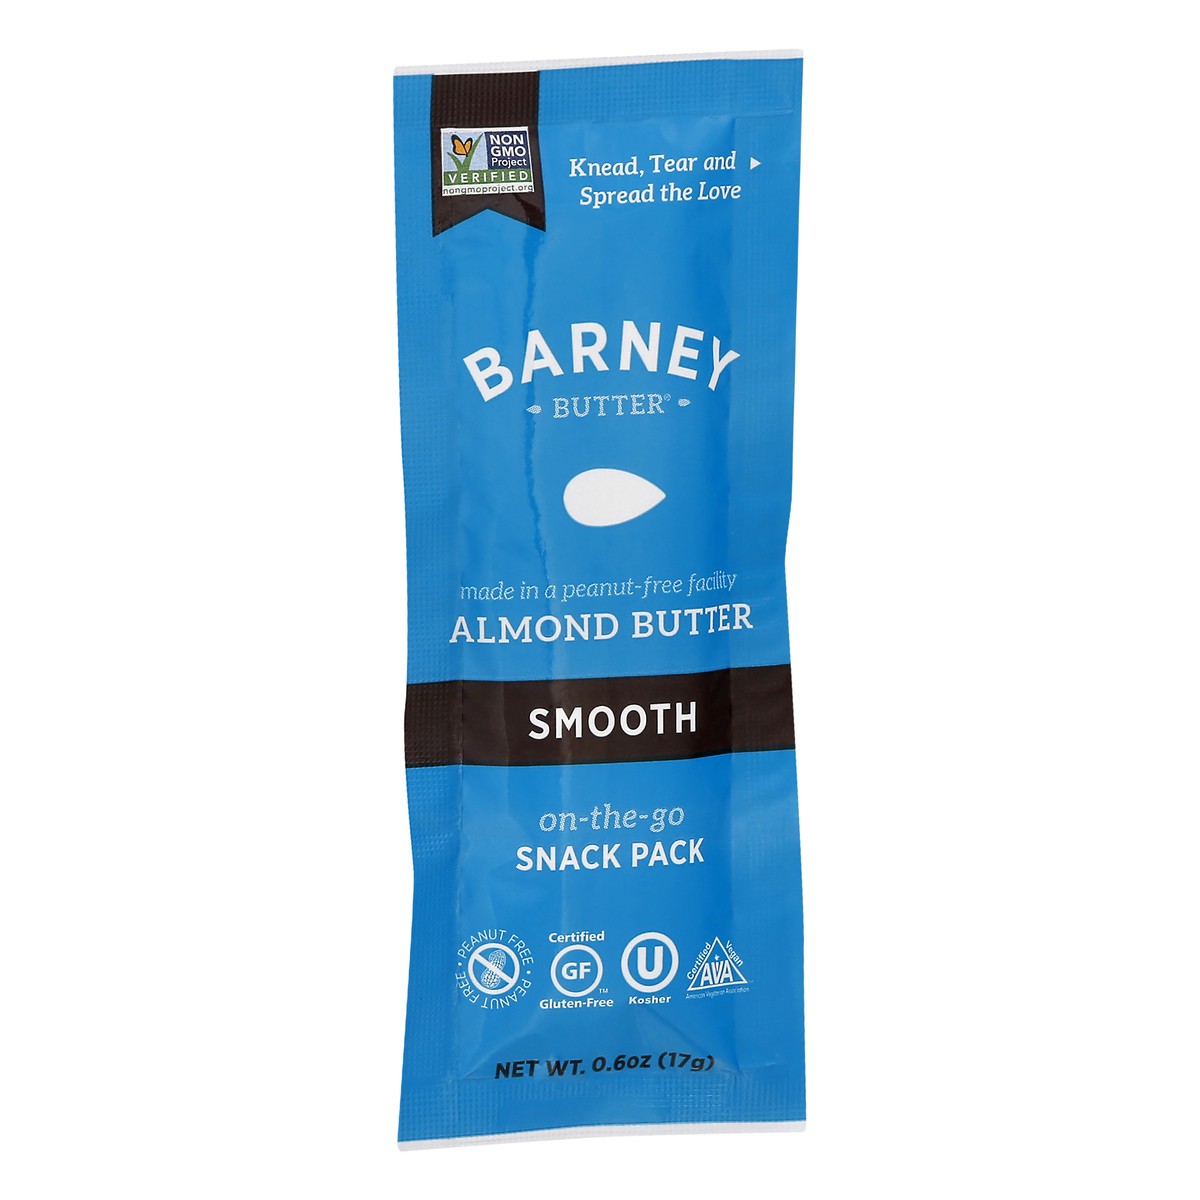 slide 2 of 10, Barney Butter Almond Butter, Smooth, On-the-Go, Snack Pack, 0.6 oz